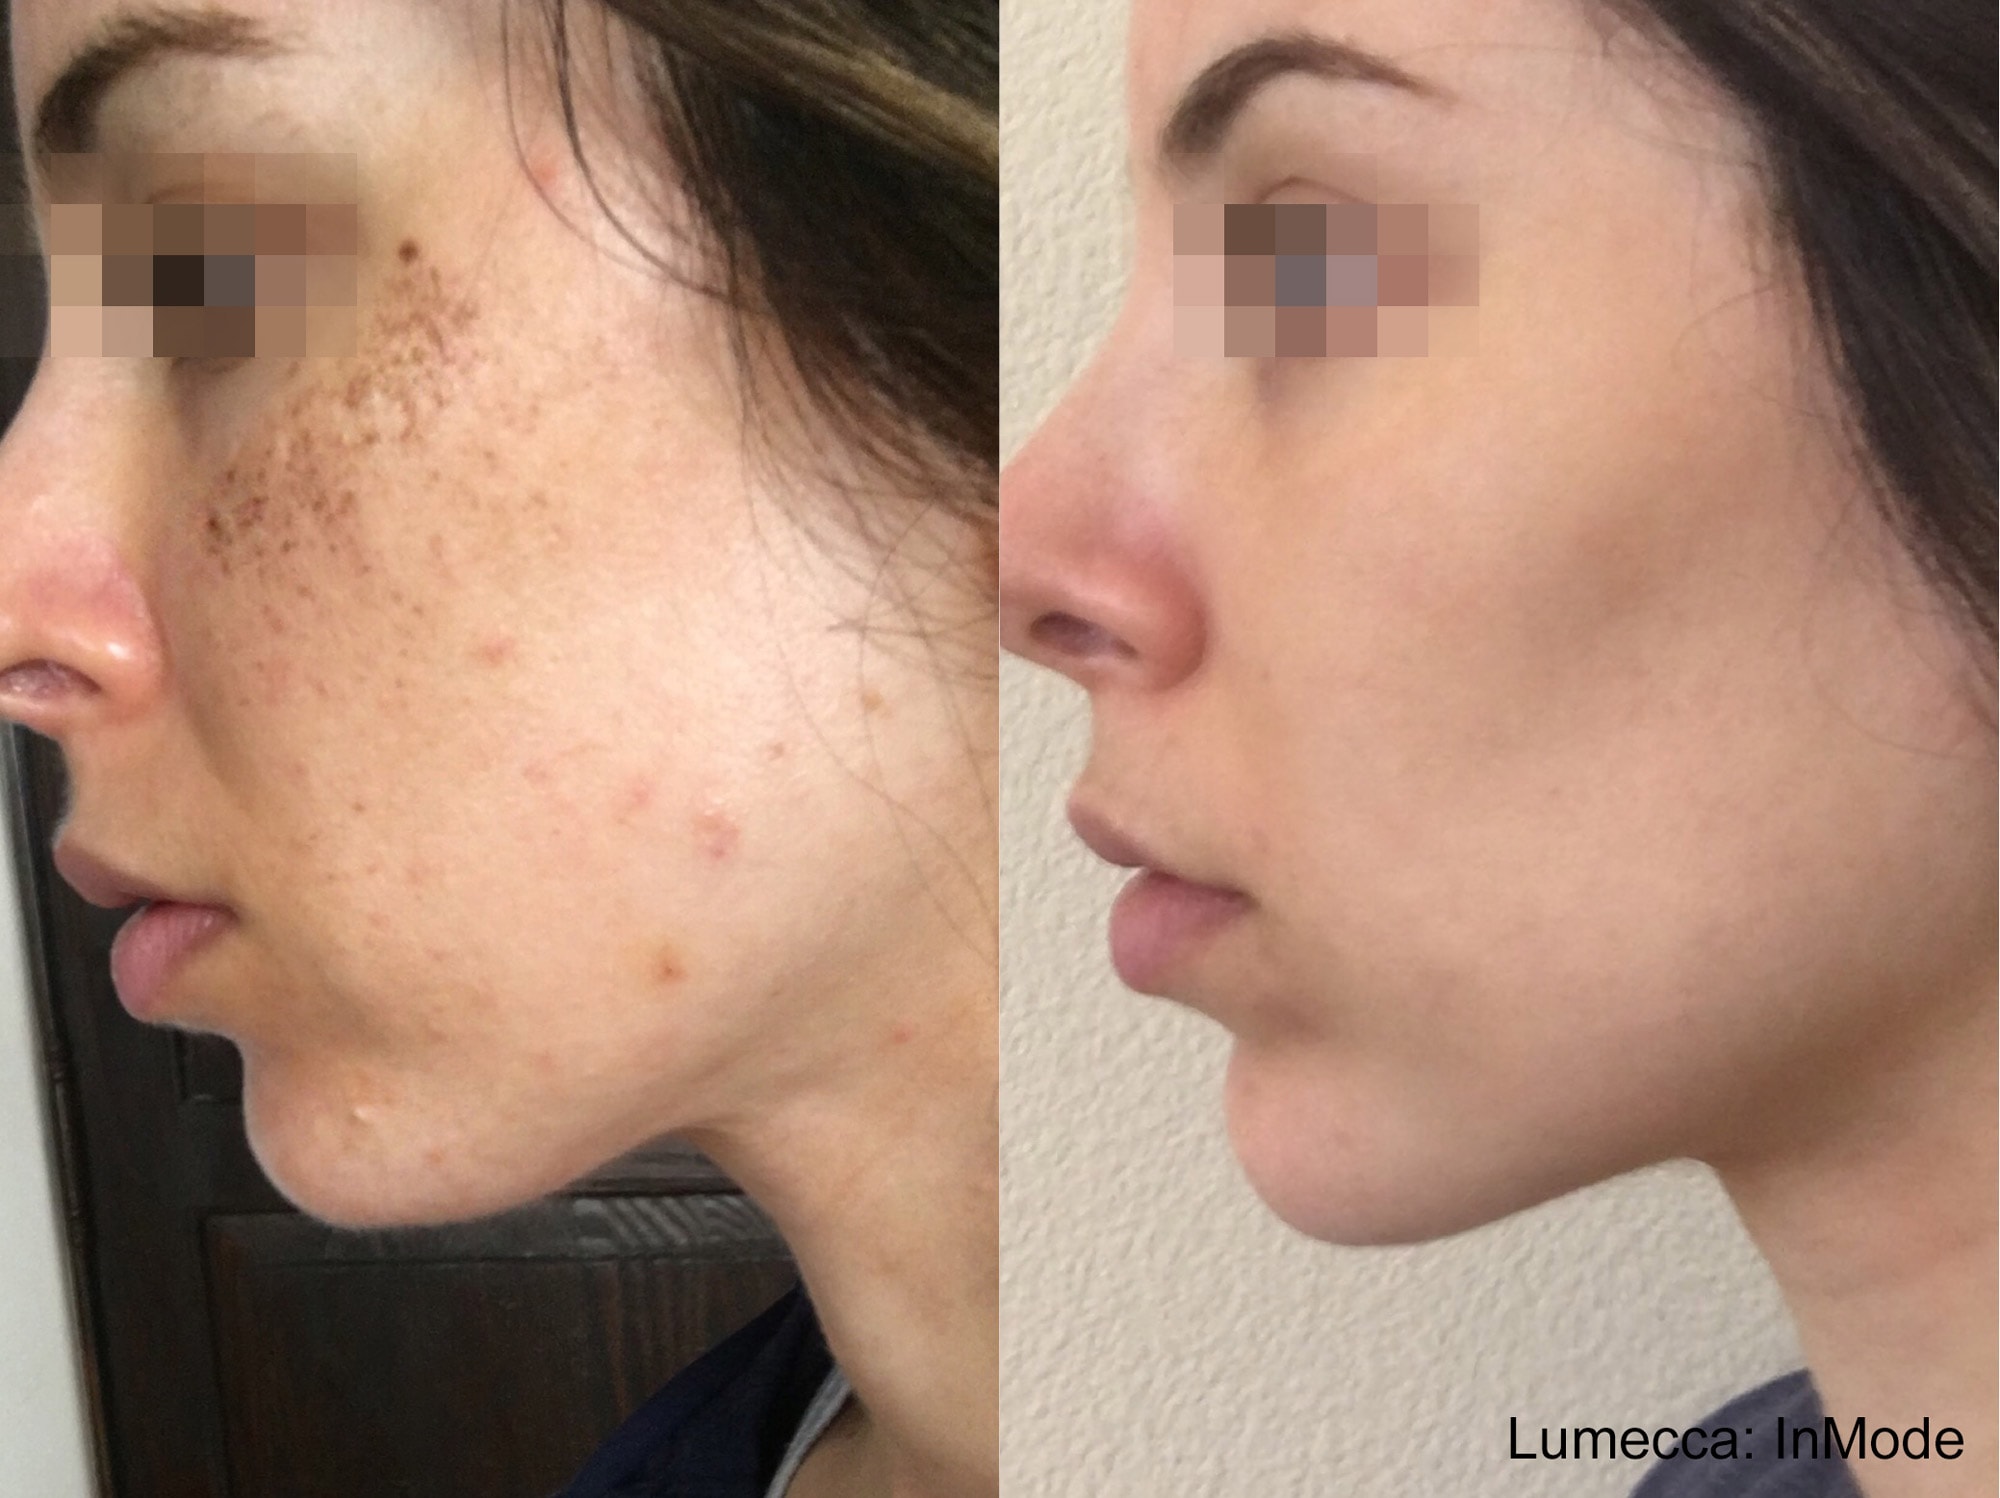 Before and After photos of Lumecca treatments improving skin texture and eliminating dark spots and acne on a woman’s cheeks